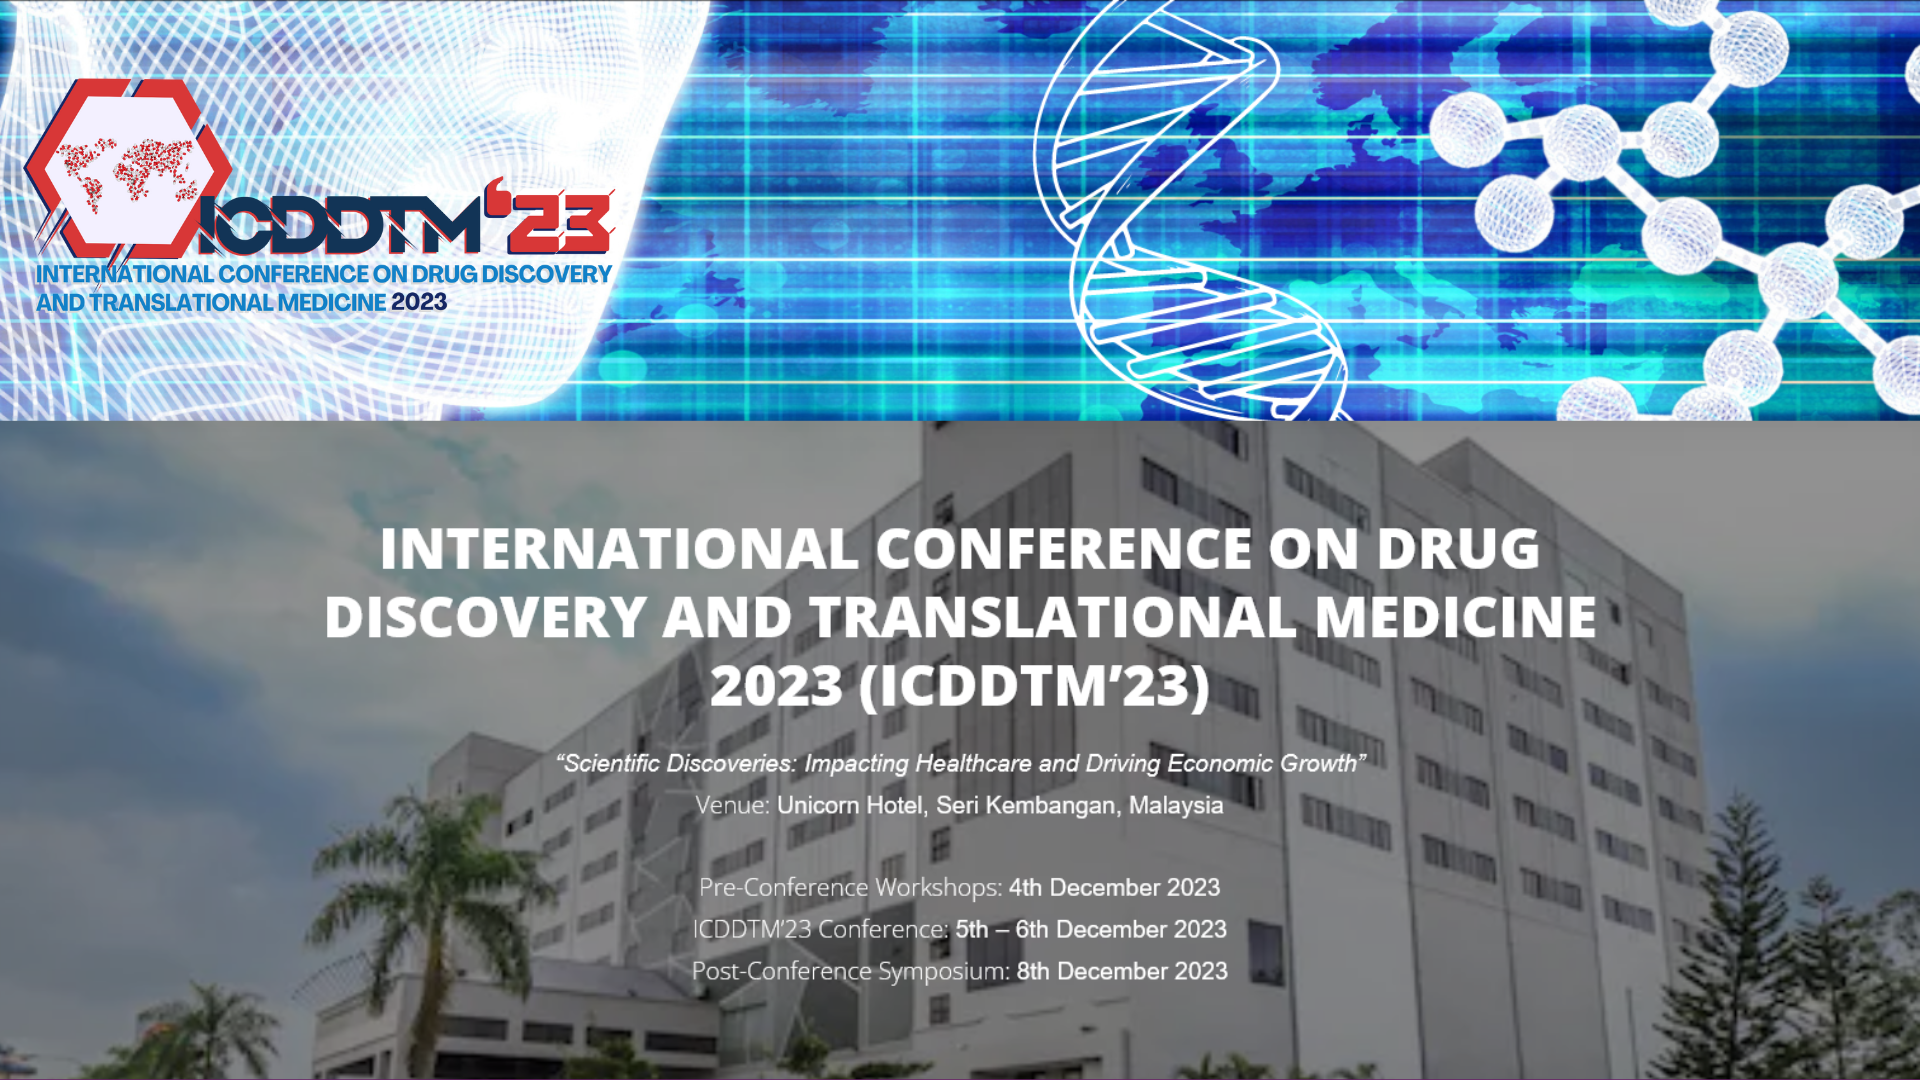 The International Conference on Drug Discovery and Translational Medicine (ICDDTM’23)